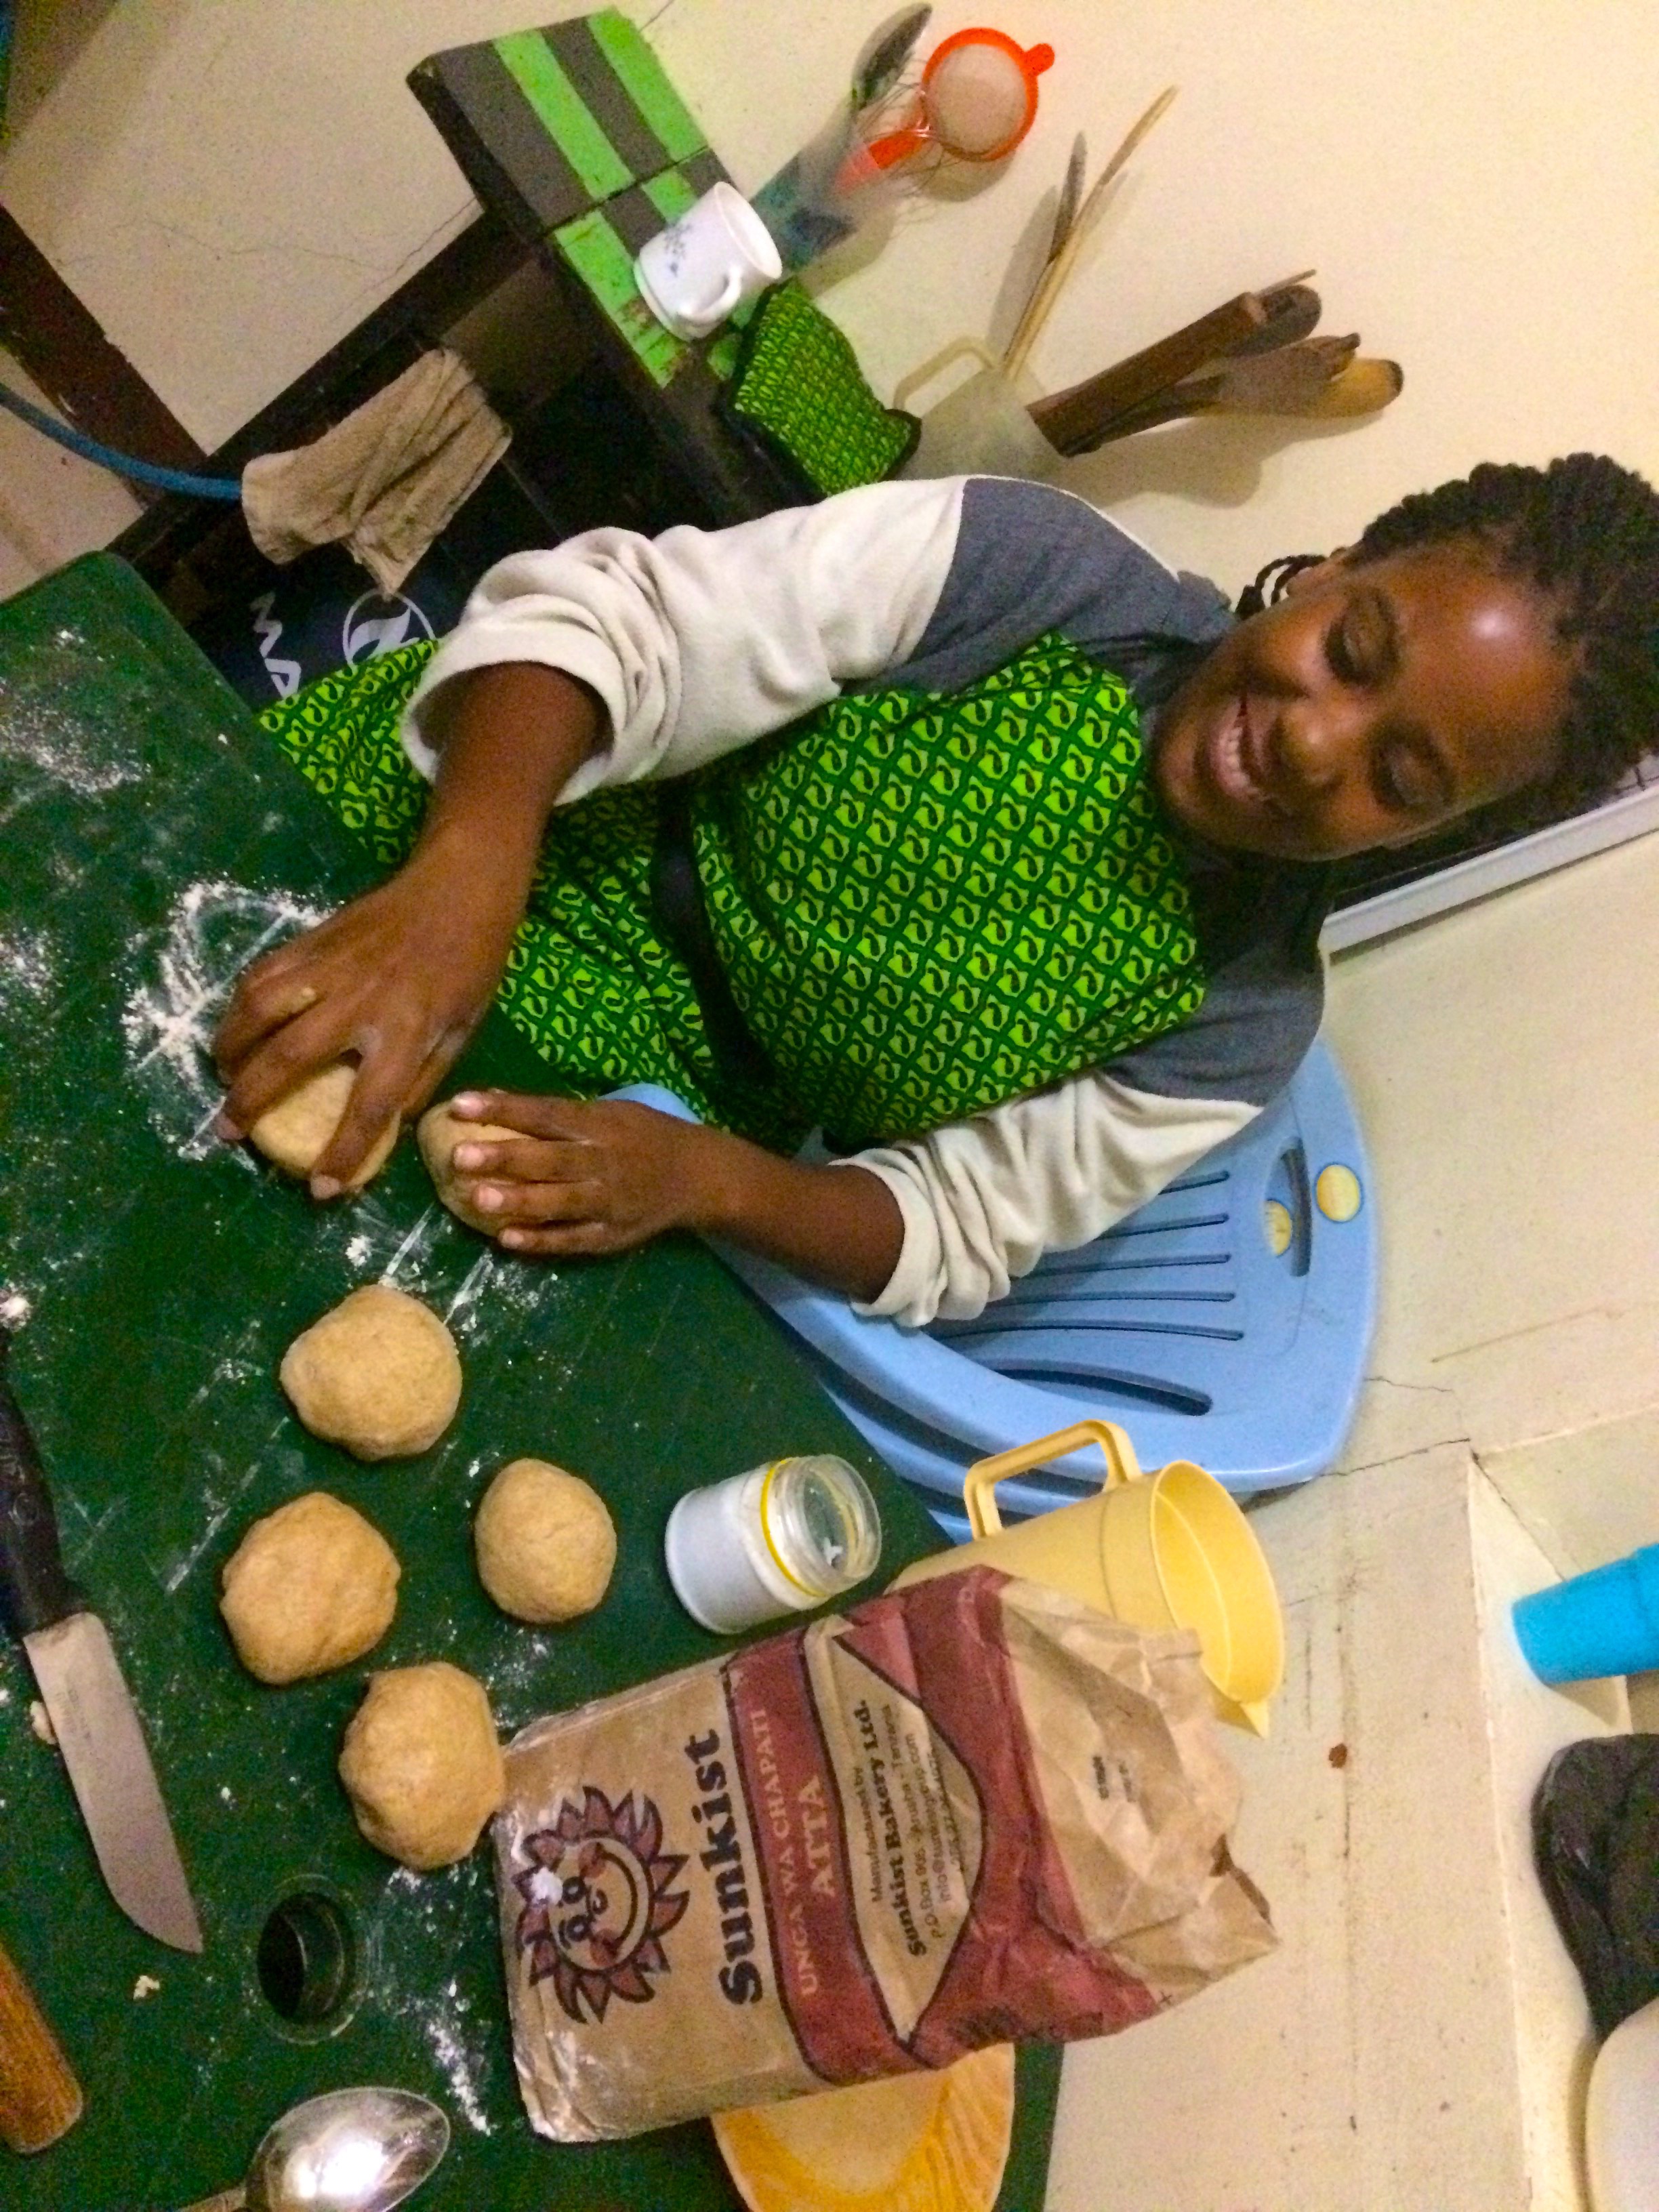 Chapati cooking lessons by Sungi – Arusha